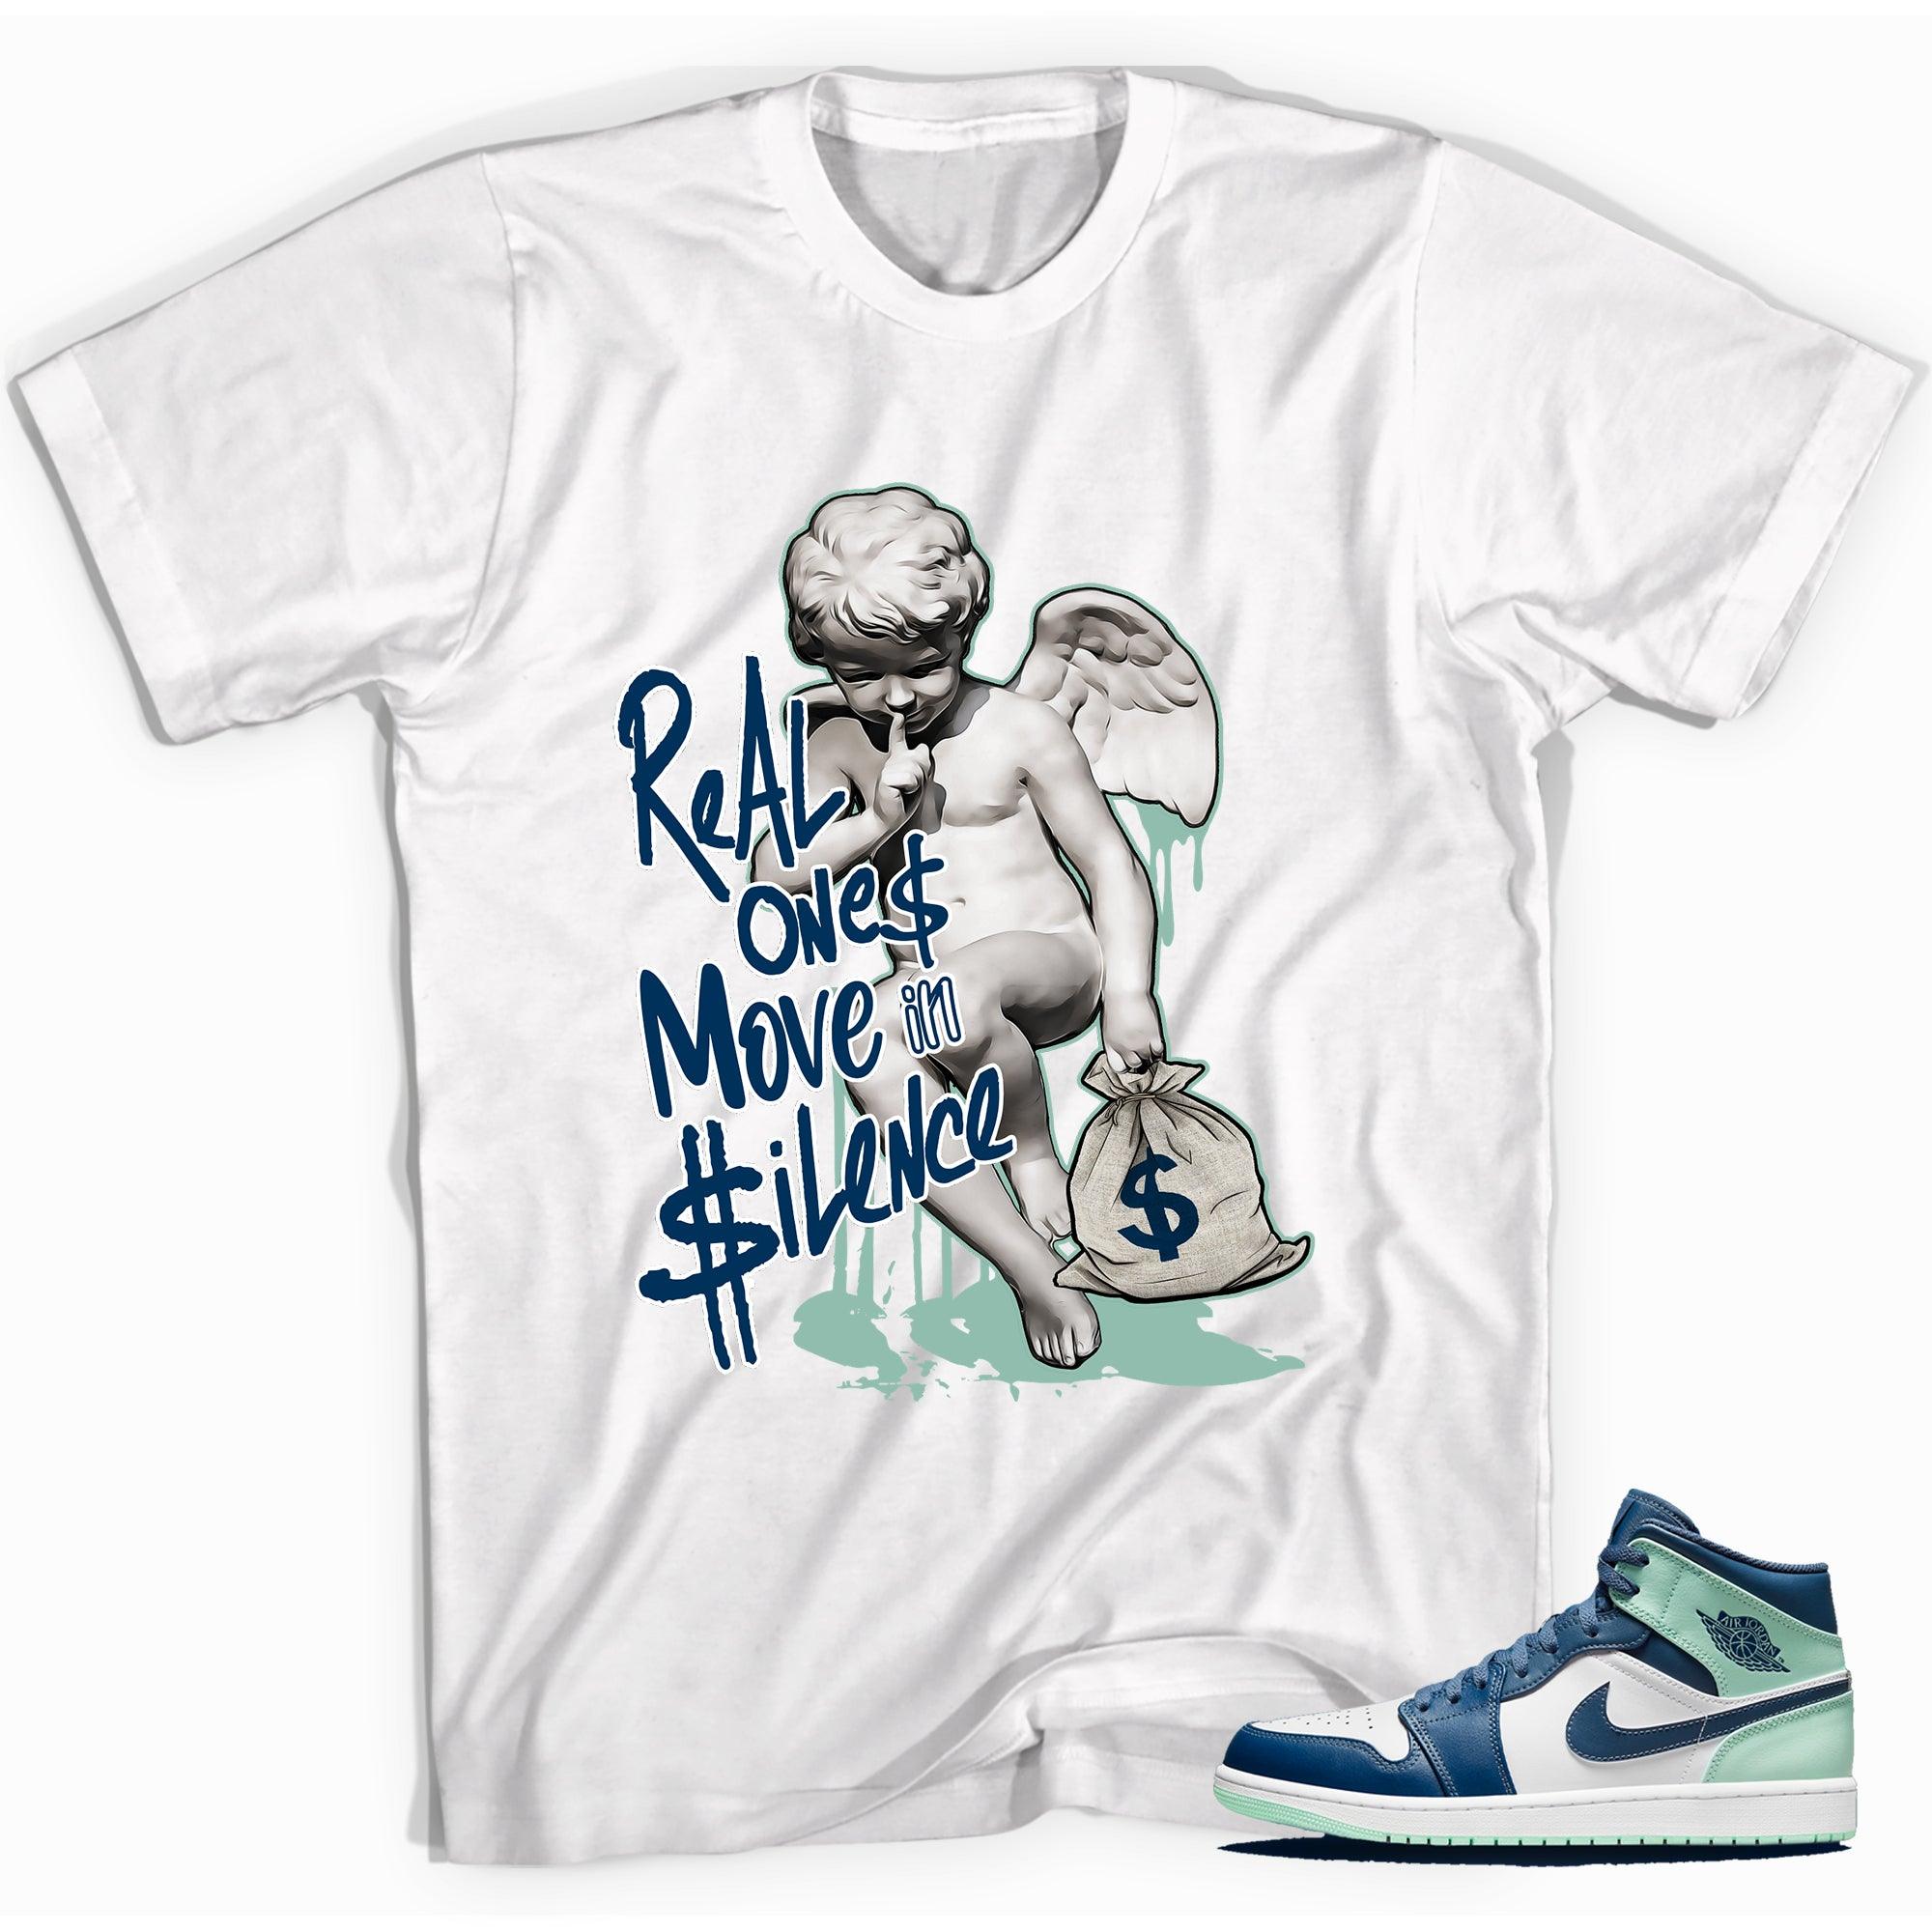 Real Ones Move In Silence Shirt AJ 1 Mid Mystic Navy Mint Foam photo